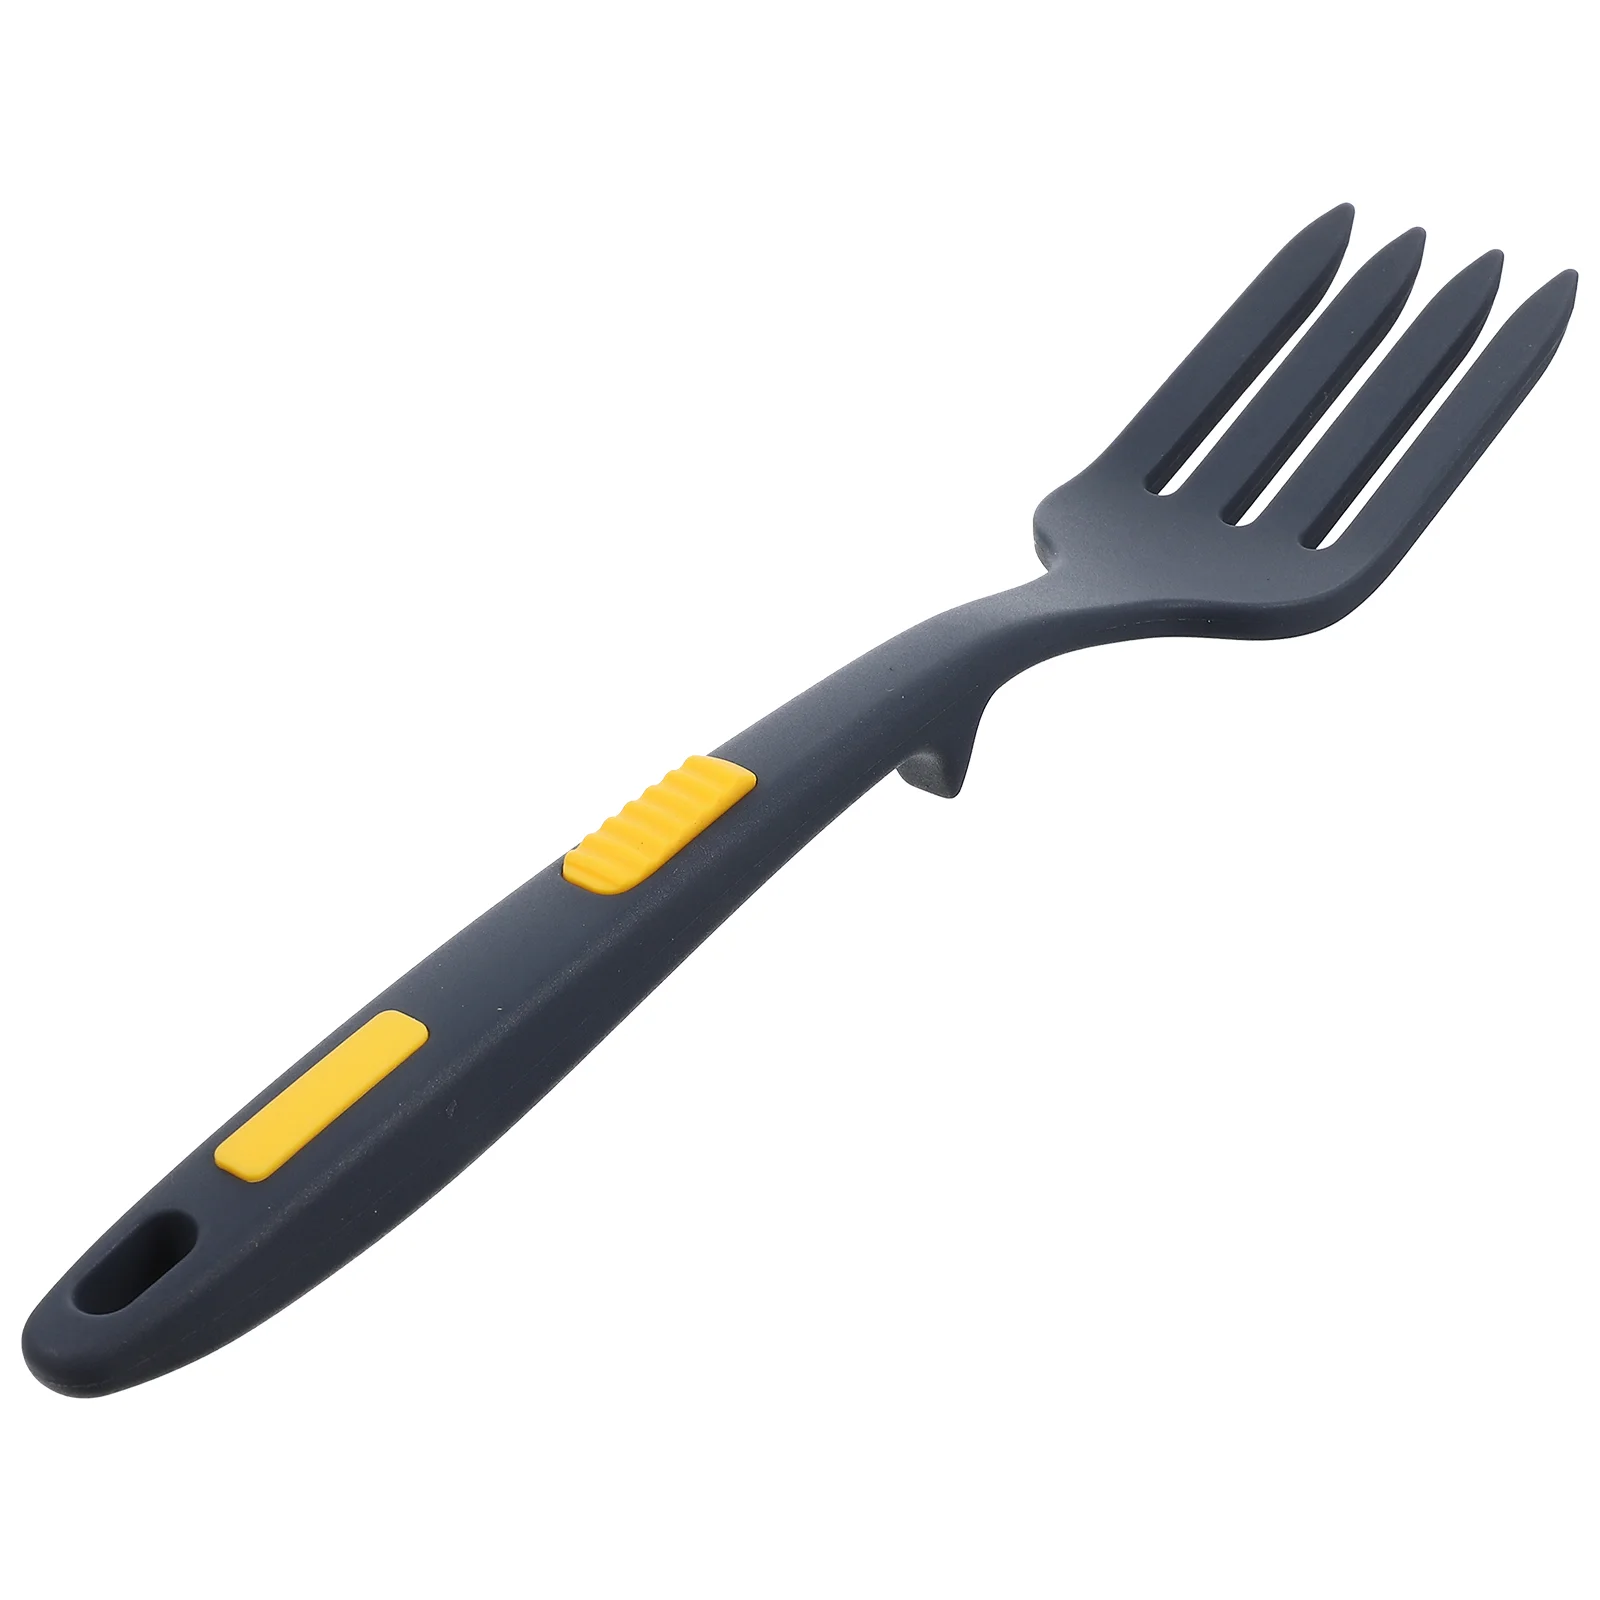 

Fork Silicone Cooking Forks Mixing Salad Kitchen Serving Pasta Appetizers Food Large Server Baking Rubber Grill Oyster Ergonomic